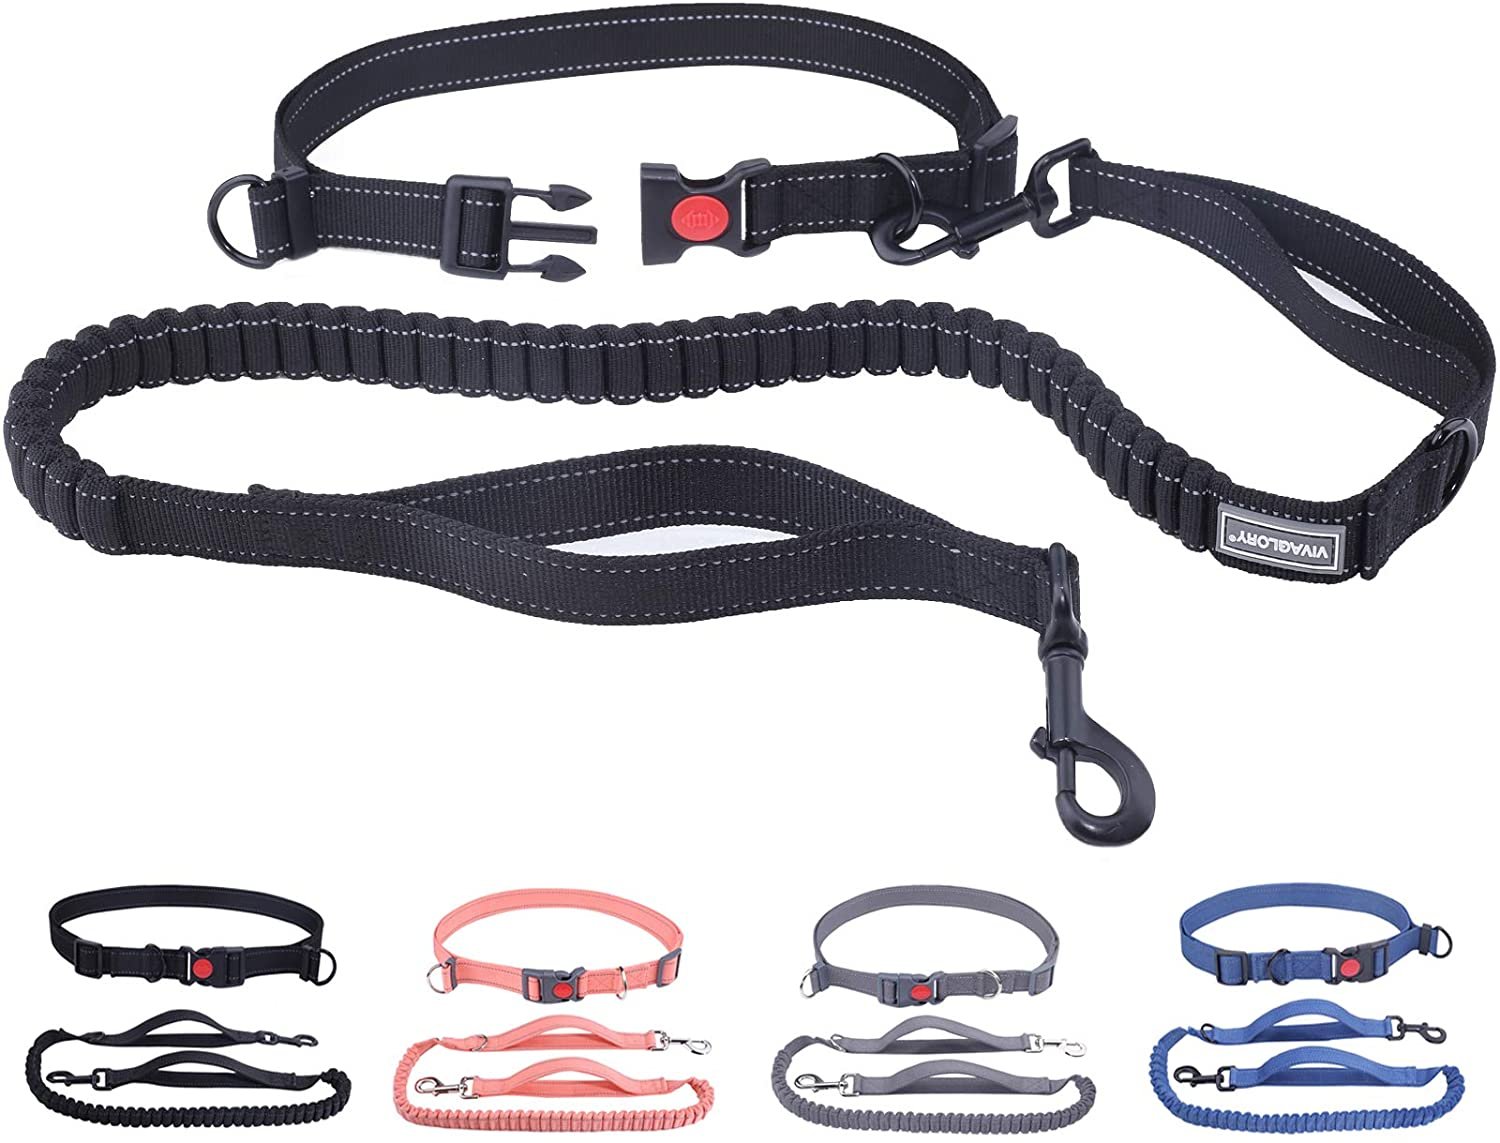 Double Handle Reflective Waist Leash for Training Running Walking Fits Waist from 32½ to 58 inch VIVAGLORY Hands Free Dog Leash with Dual Wavelength Bungees for Medium Large Dogs Black 